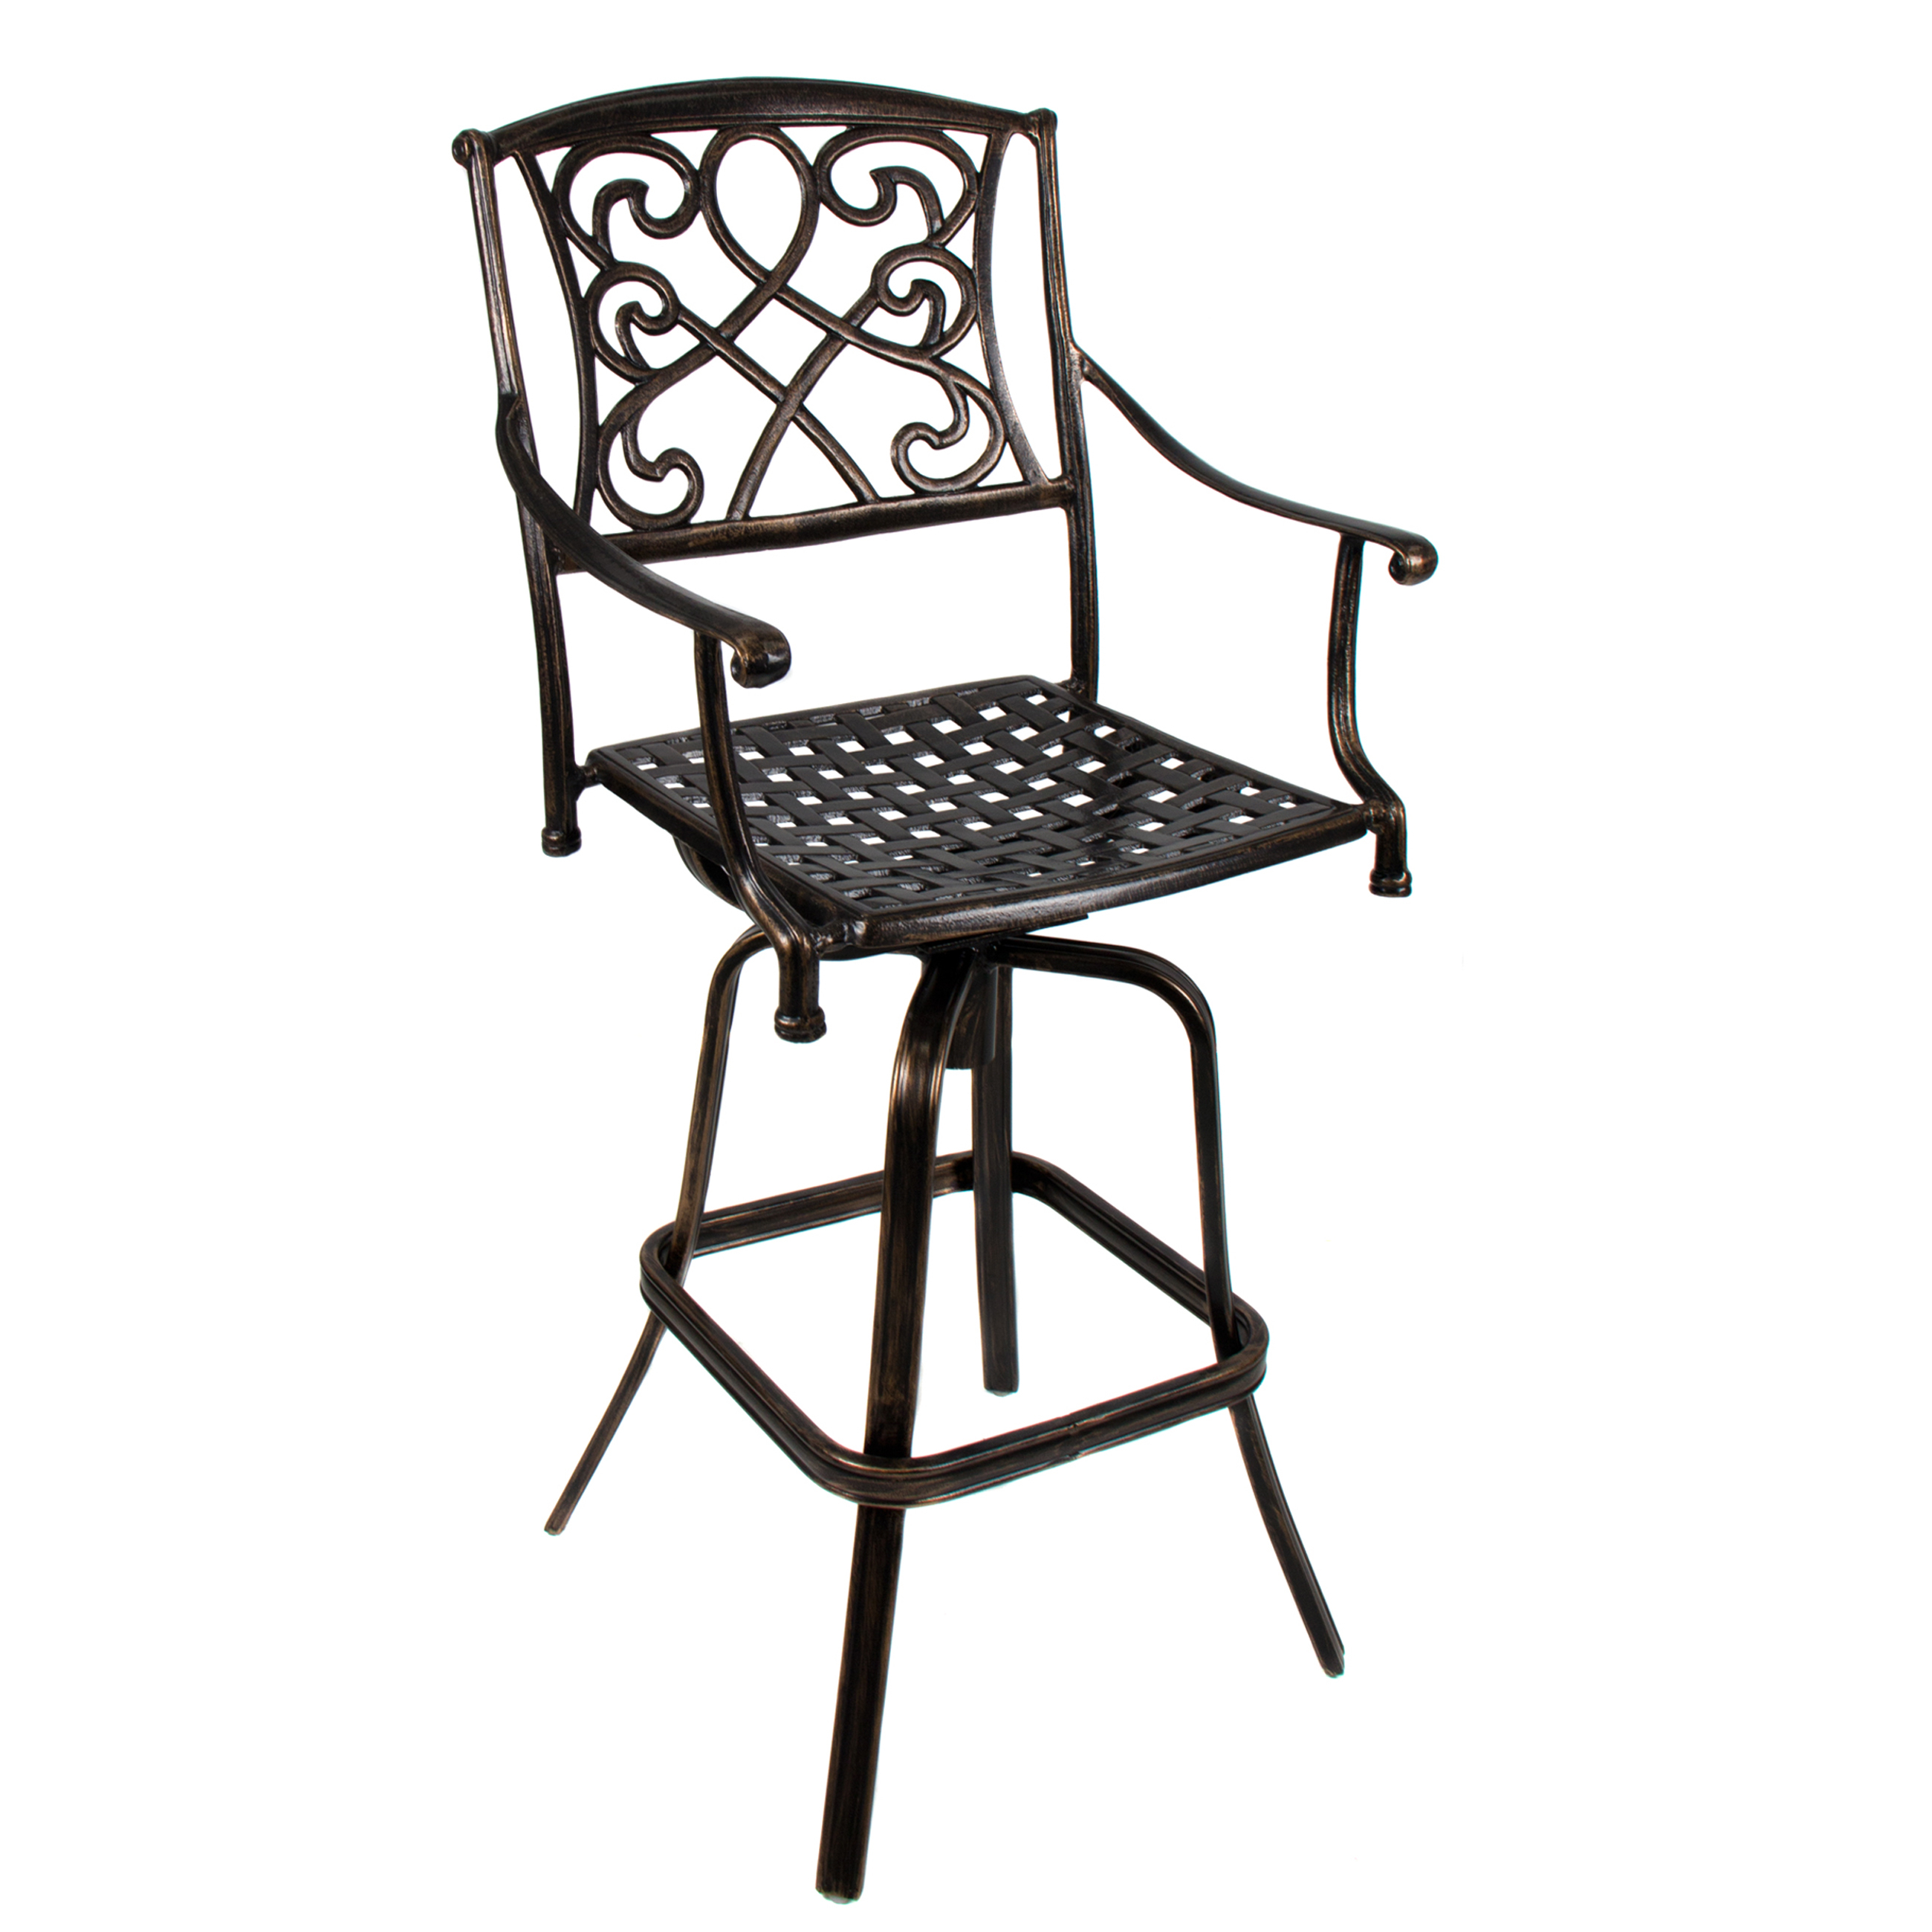 Details About Outdoor Cast Aluminum Swivel Bar Stool Patio Furniture Antique Copper Design intended for sizing 2600 X 2600